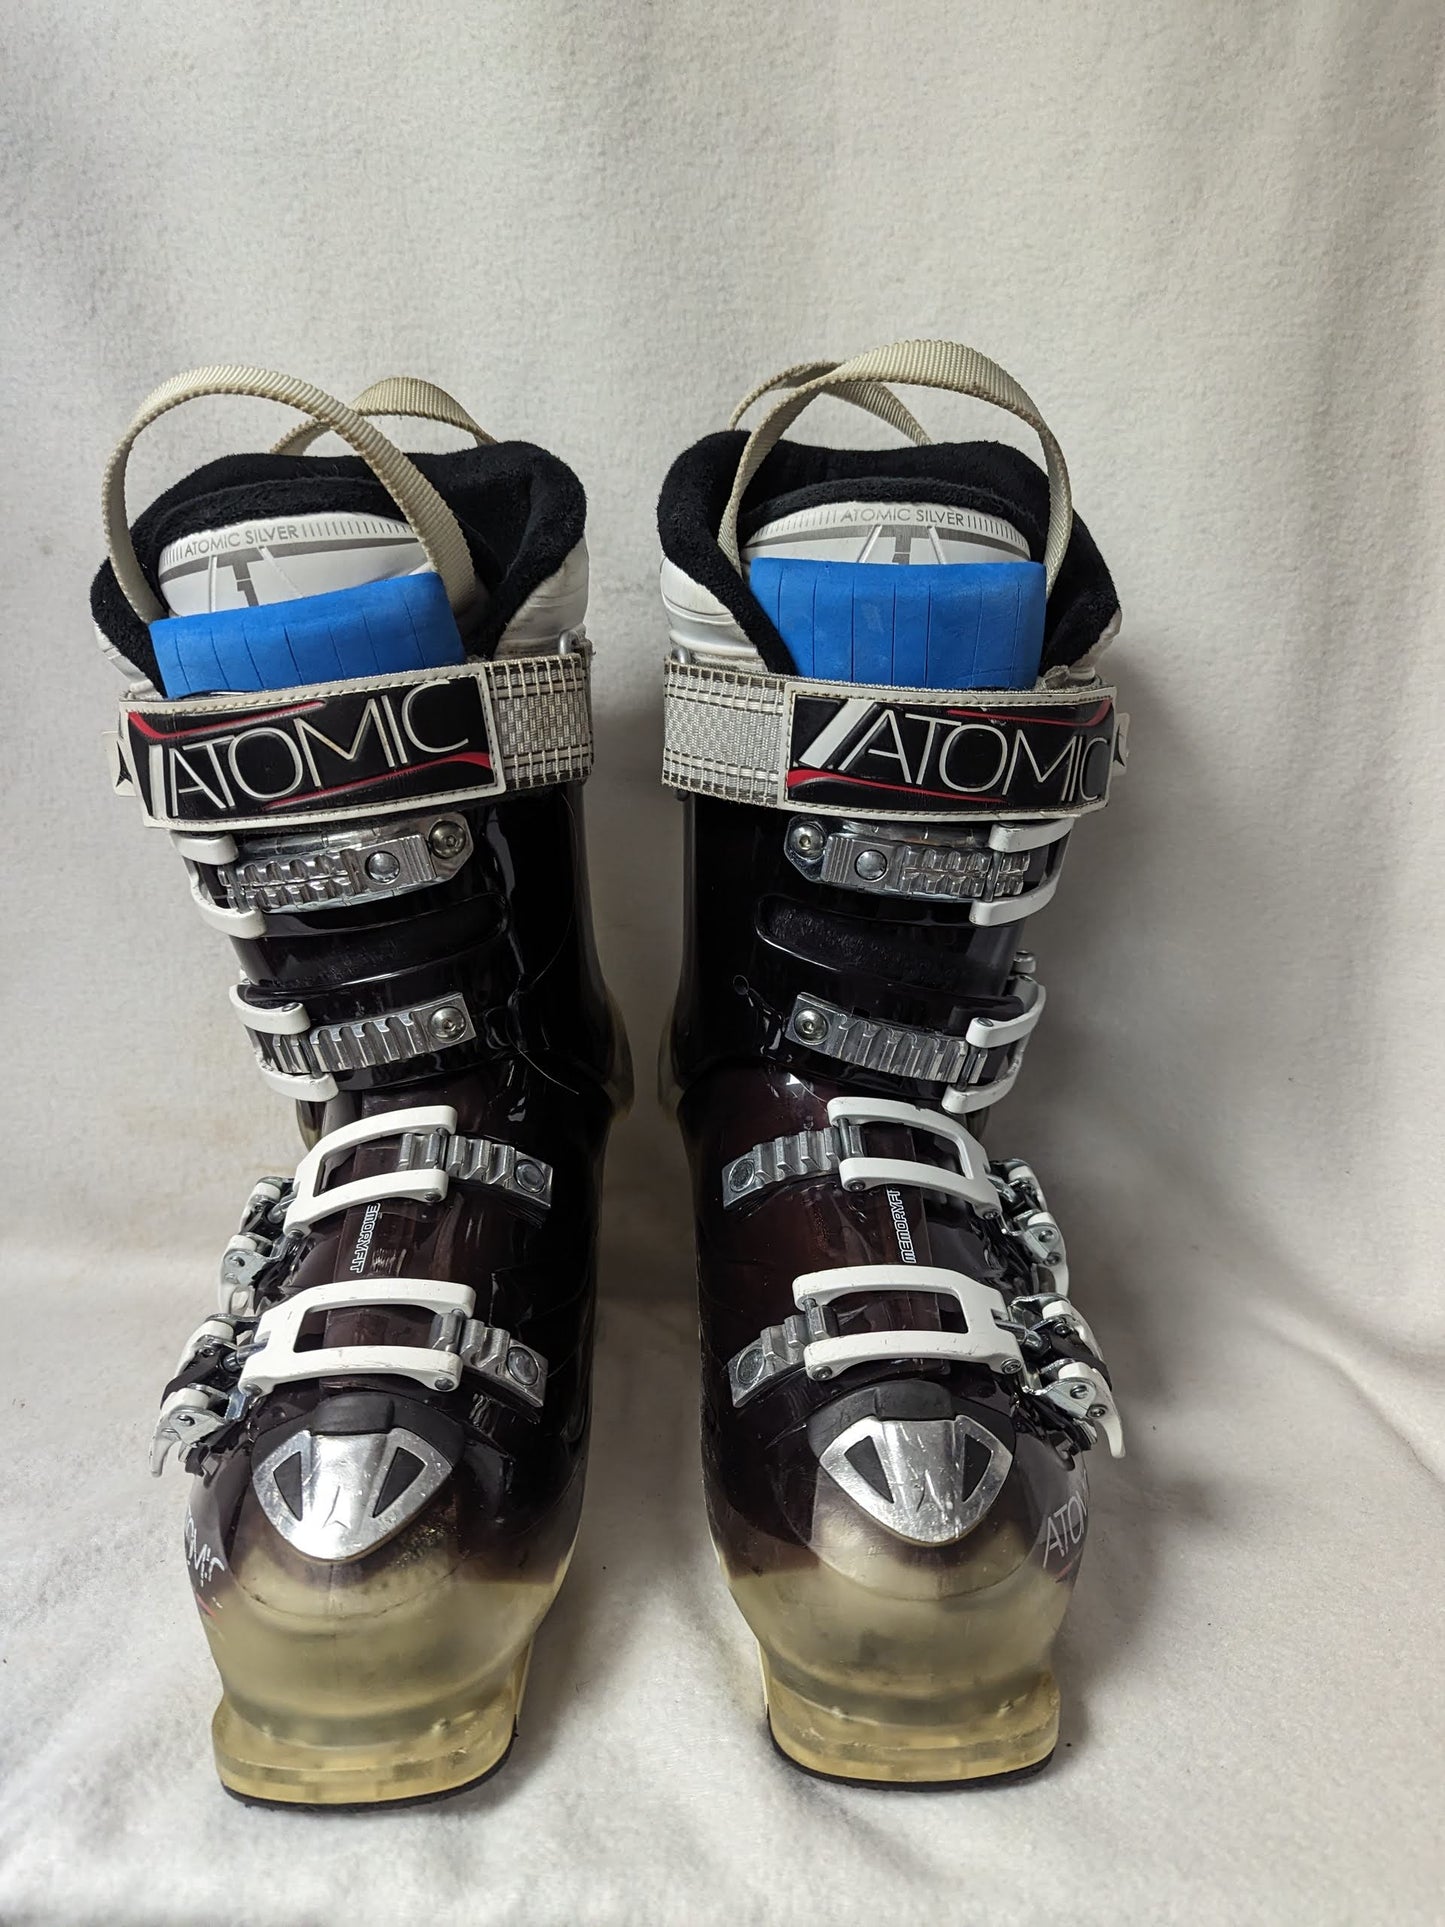 Atomic Hawx 90 Ski Boots Size 25 Color Purple Condition Used